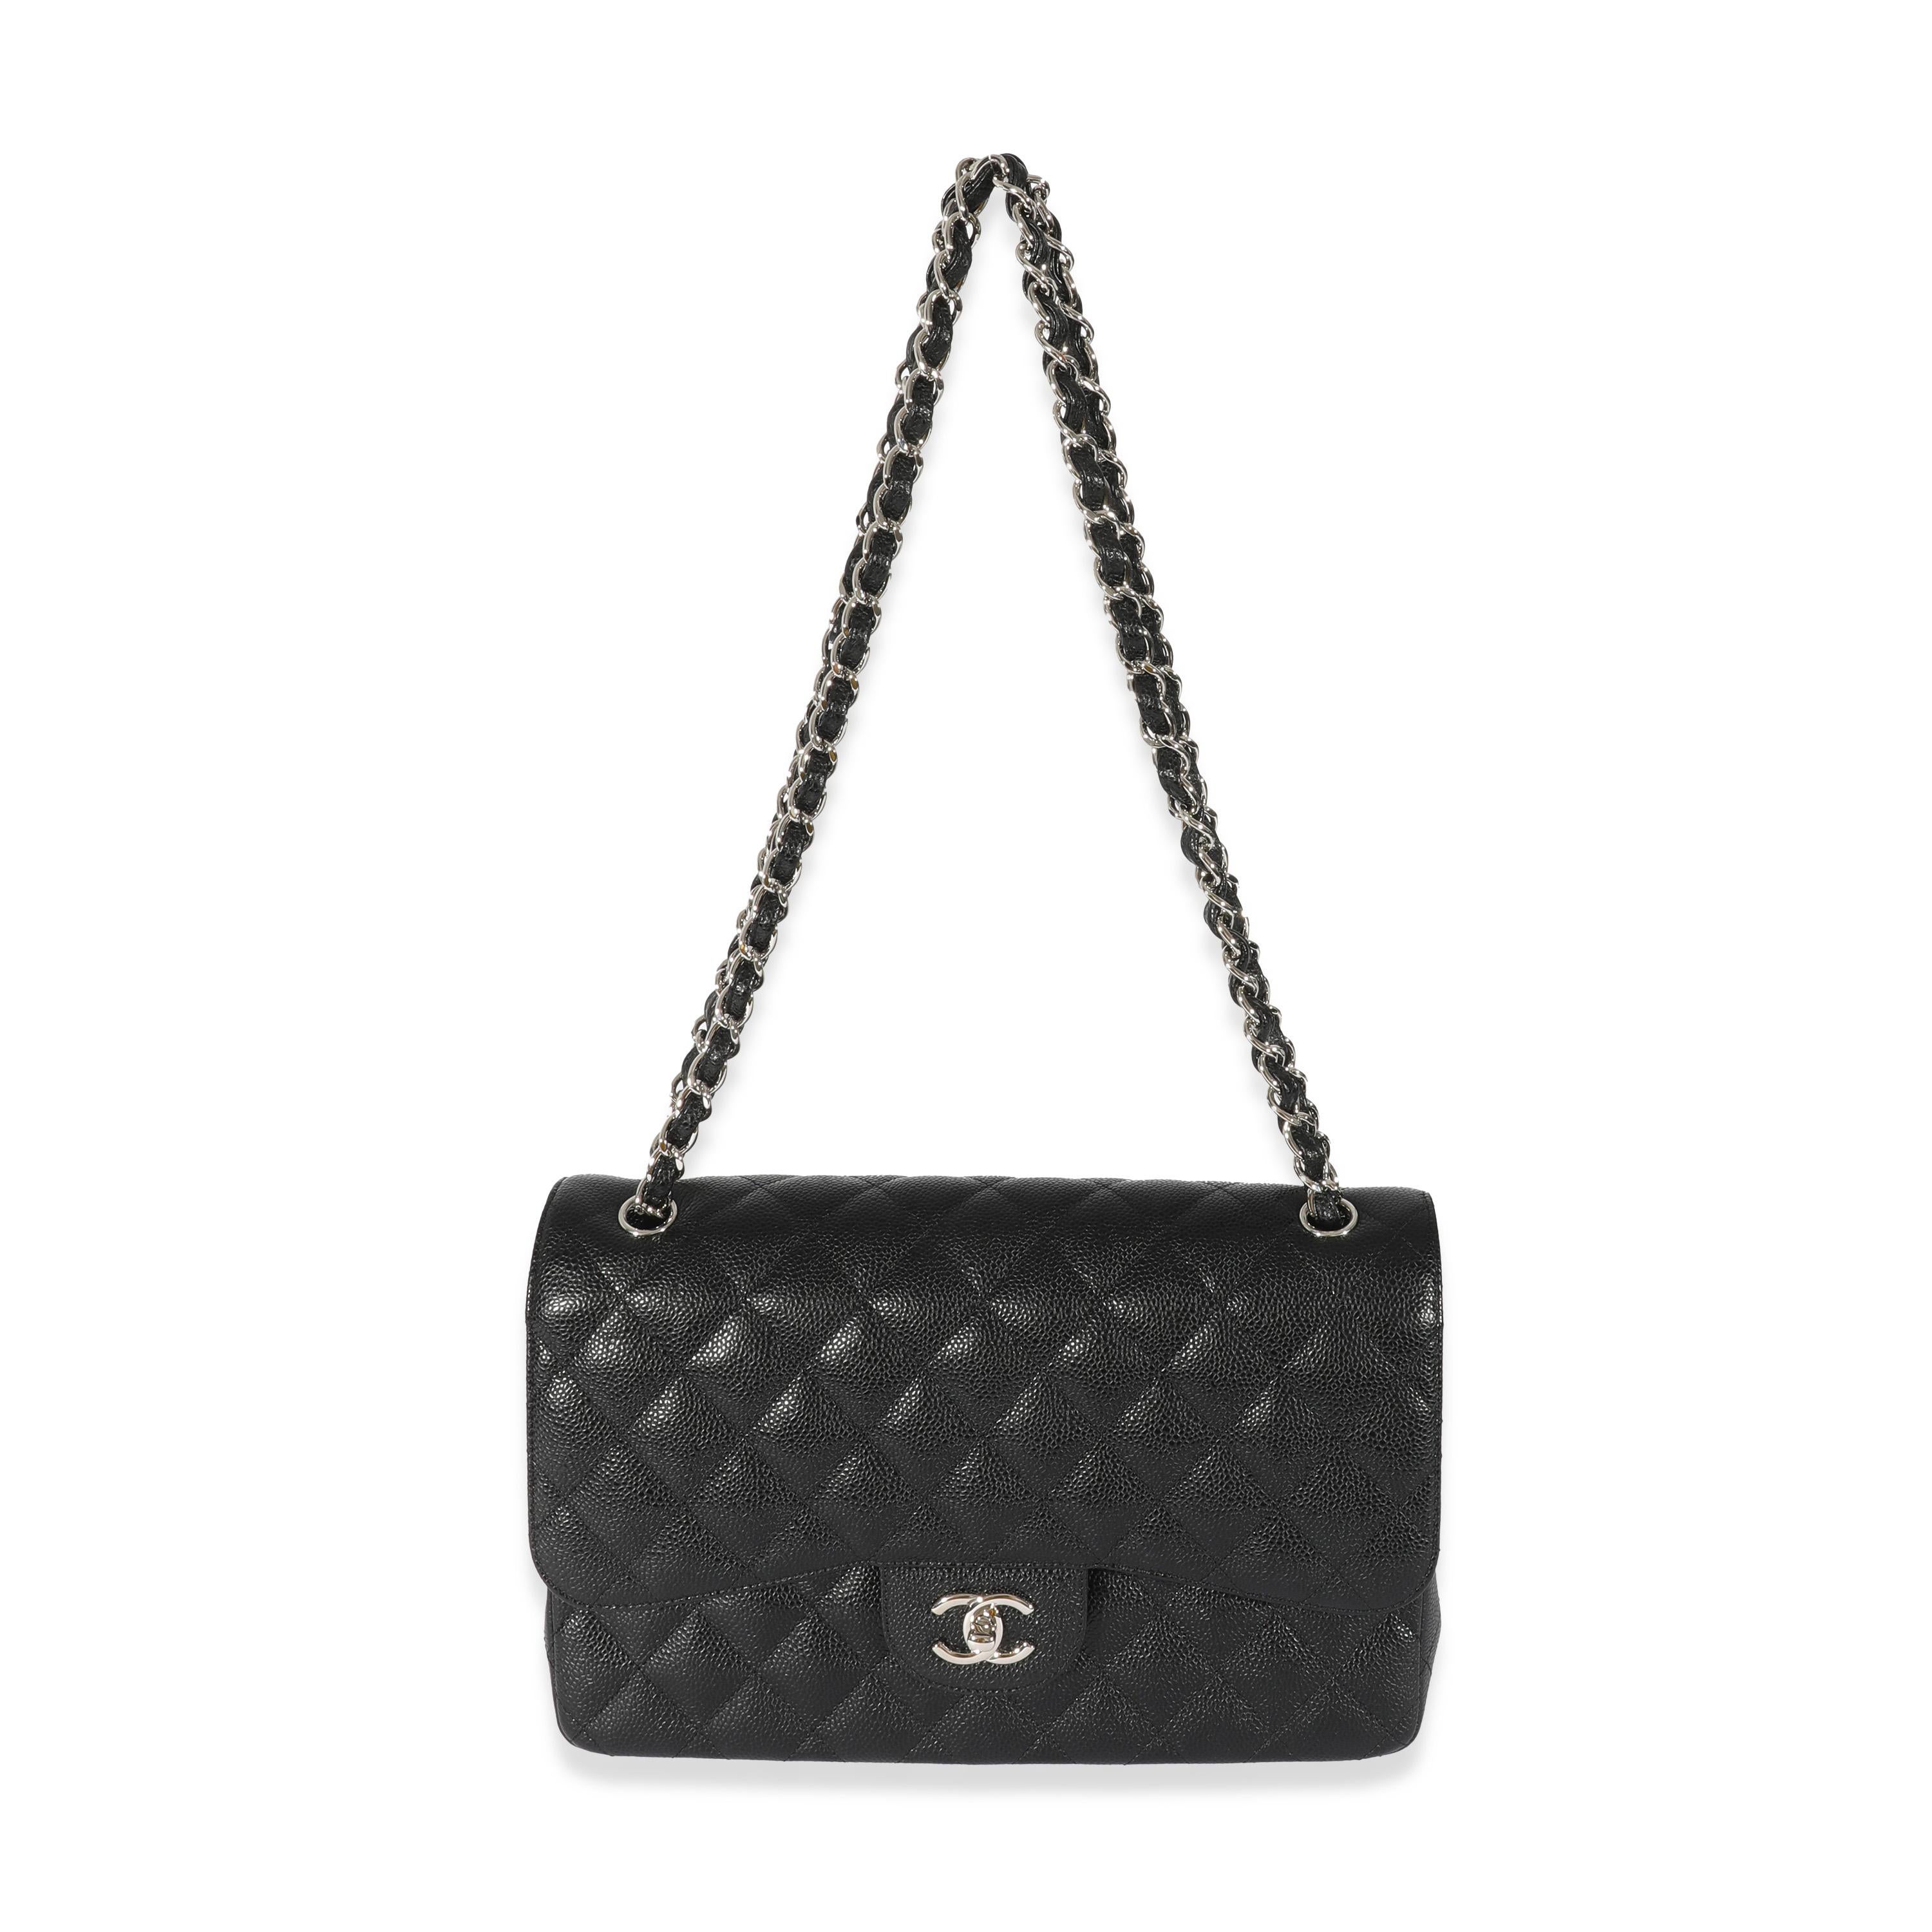 Listing Title: Chanel Black Caviar Jumbo Classic Double Flap Bag
 SKU: 128682
 Condition: Pre-owned 
 Condition Description: A timeless classic that never goes out of style, the flap bag from Chanel dates back to 1955 and has seen a number of